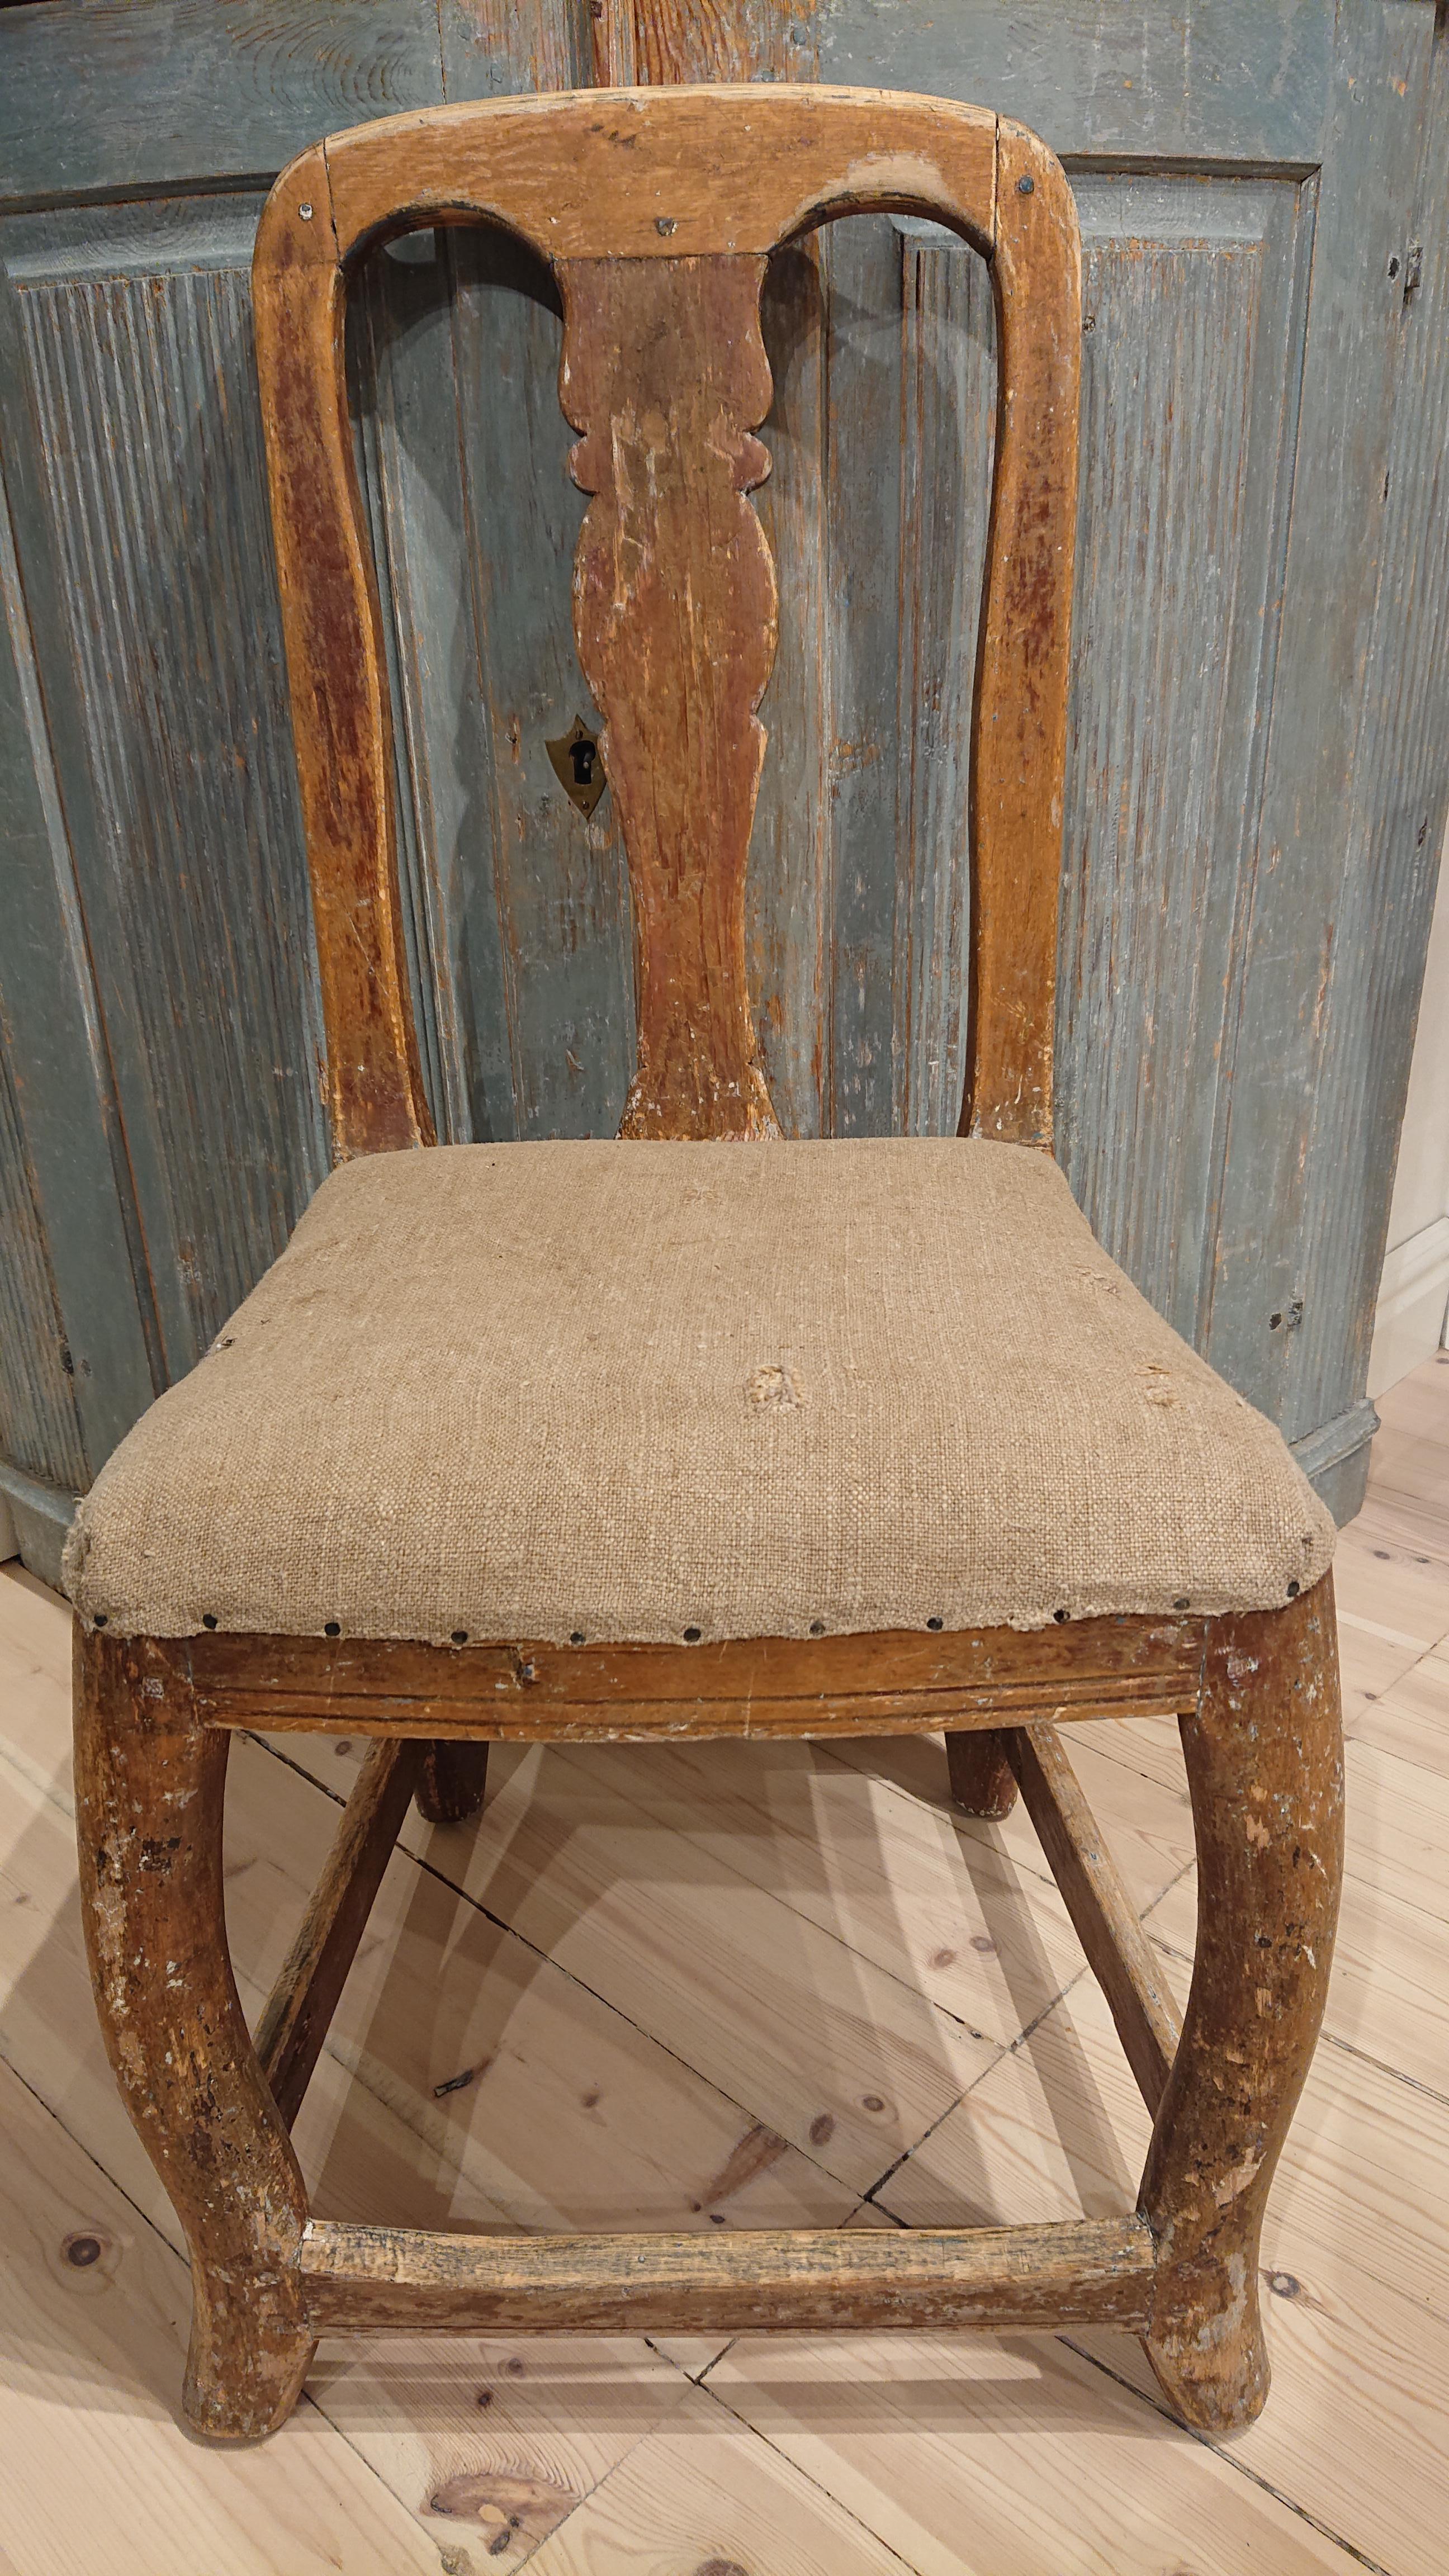 18th Century Swedish Rococo children chair from Sundsvall Medelpad, Northern Sweden
A very charming and genuine Rococo Chair.
Great for children aged 6-12 years.
Scraped by hand to its originalpaint.
Good antique condition with minor historic